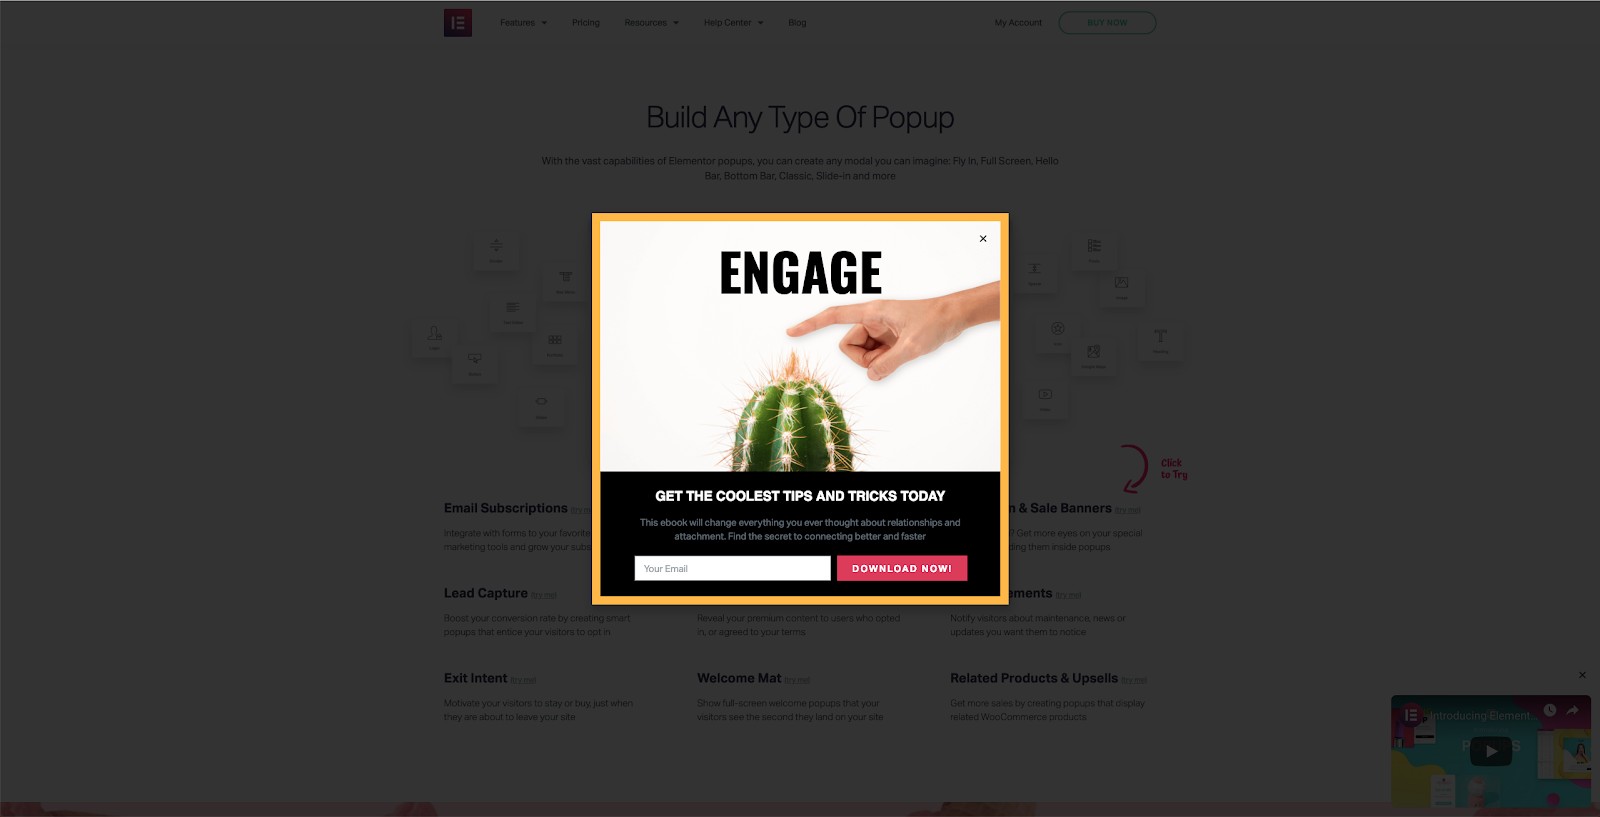 An example of a popup ad created using Elementor